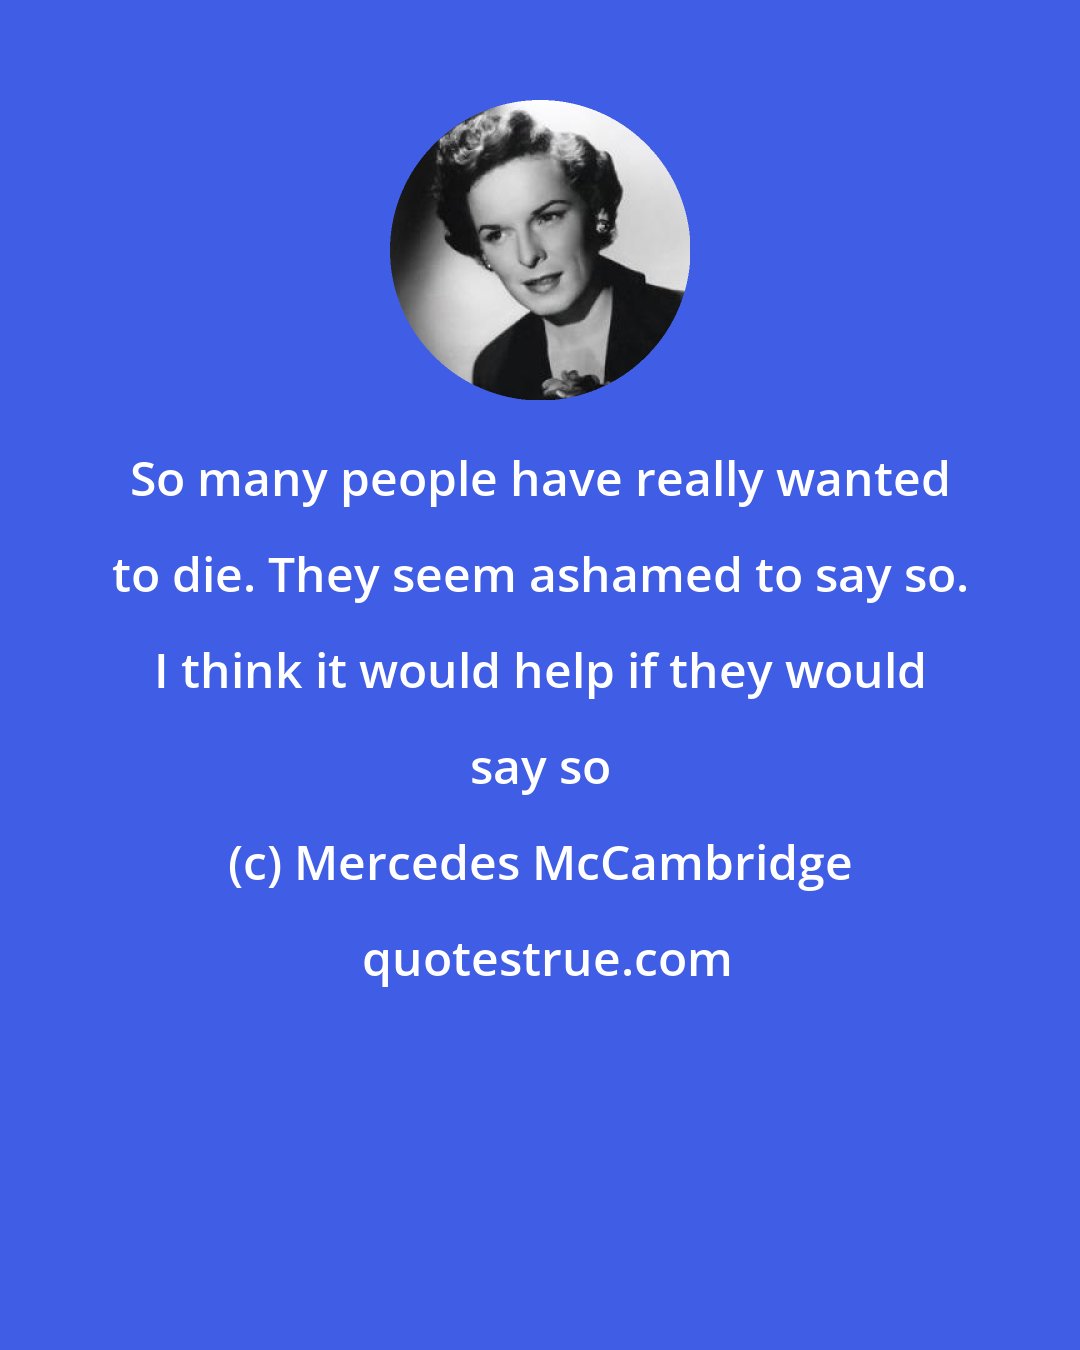 Mercedes McCambridge: So many people have really wanted to die. They seem ashamed to say so. I think it would help if they would say so